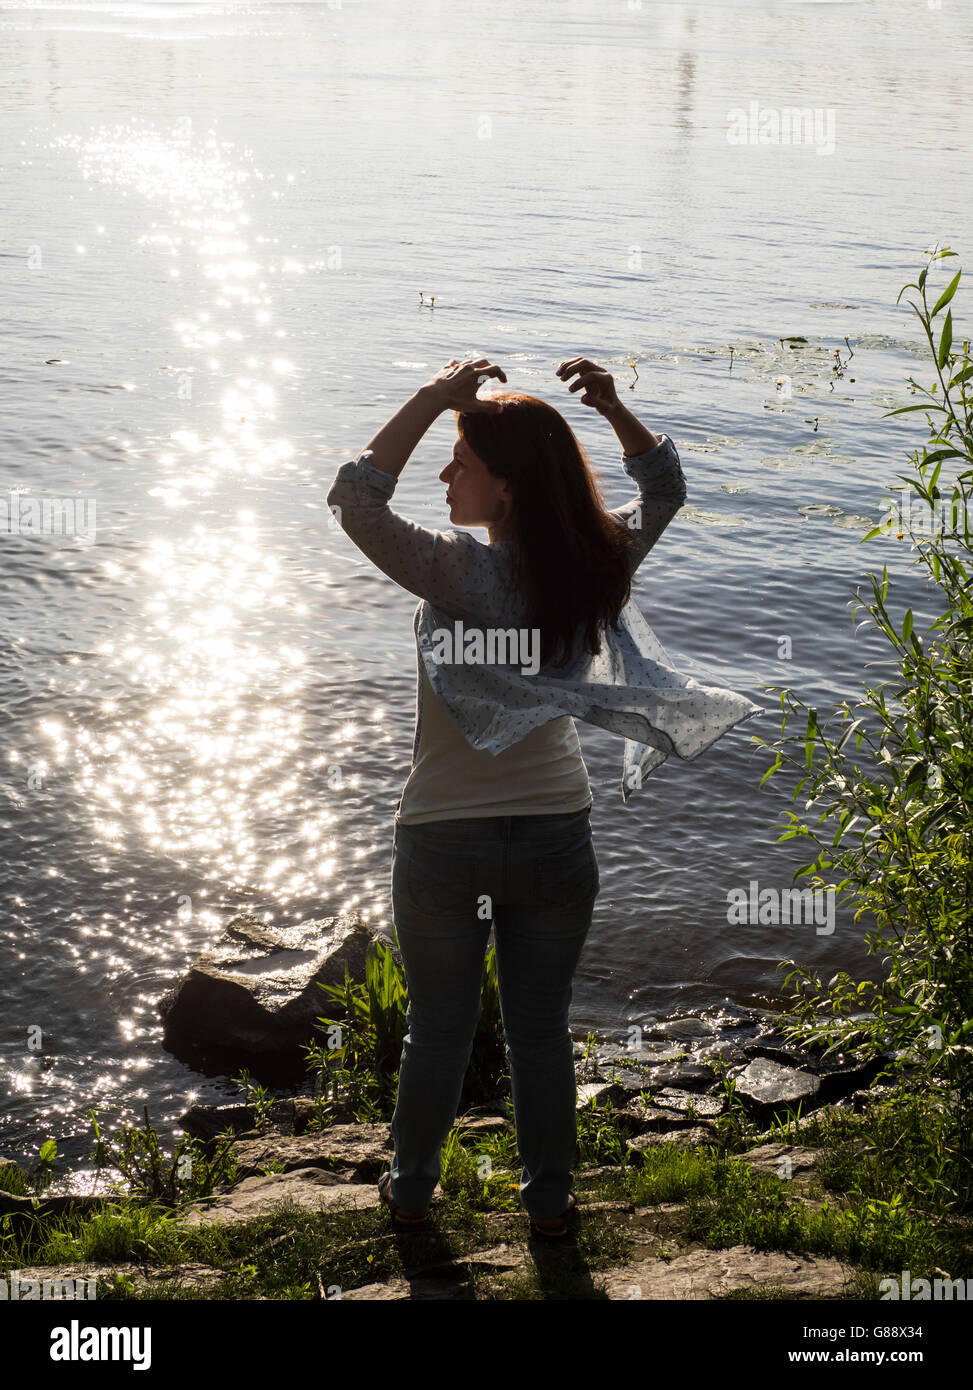 Woman standing by river with arms raised and scarf blowing in wind Stock Photo